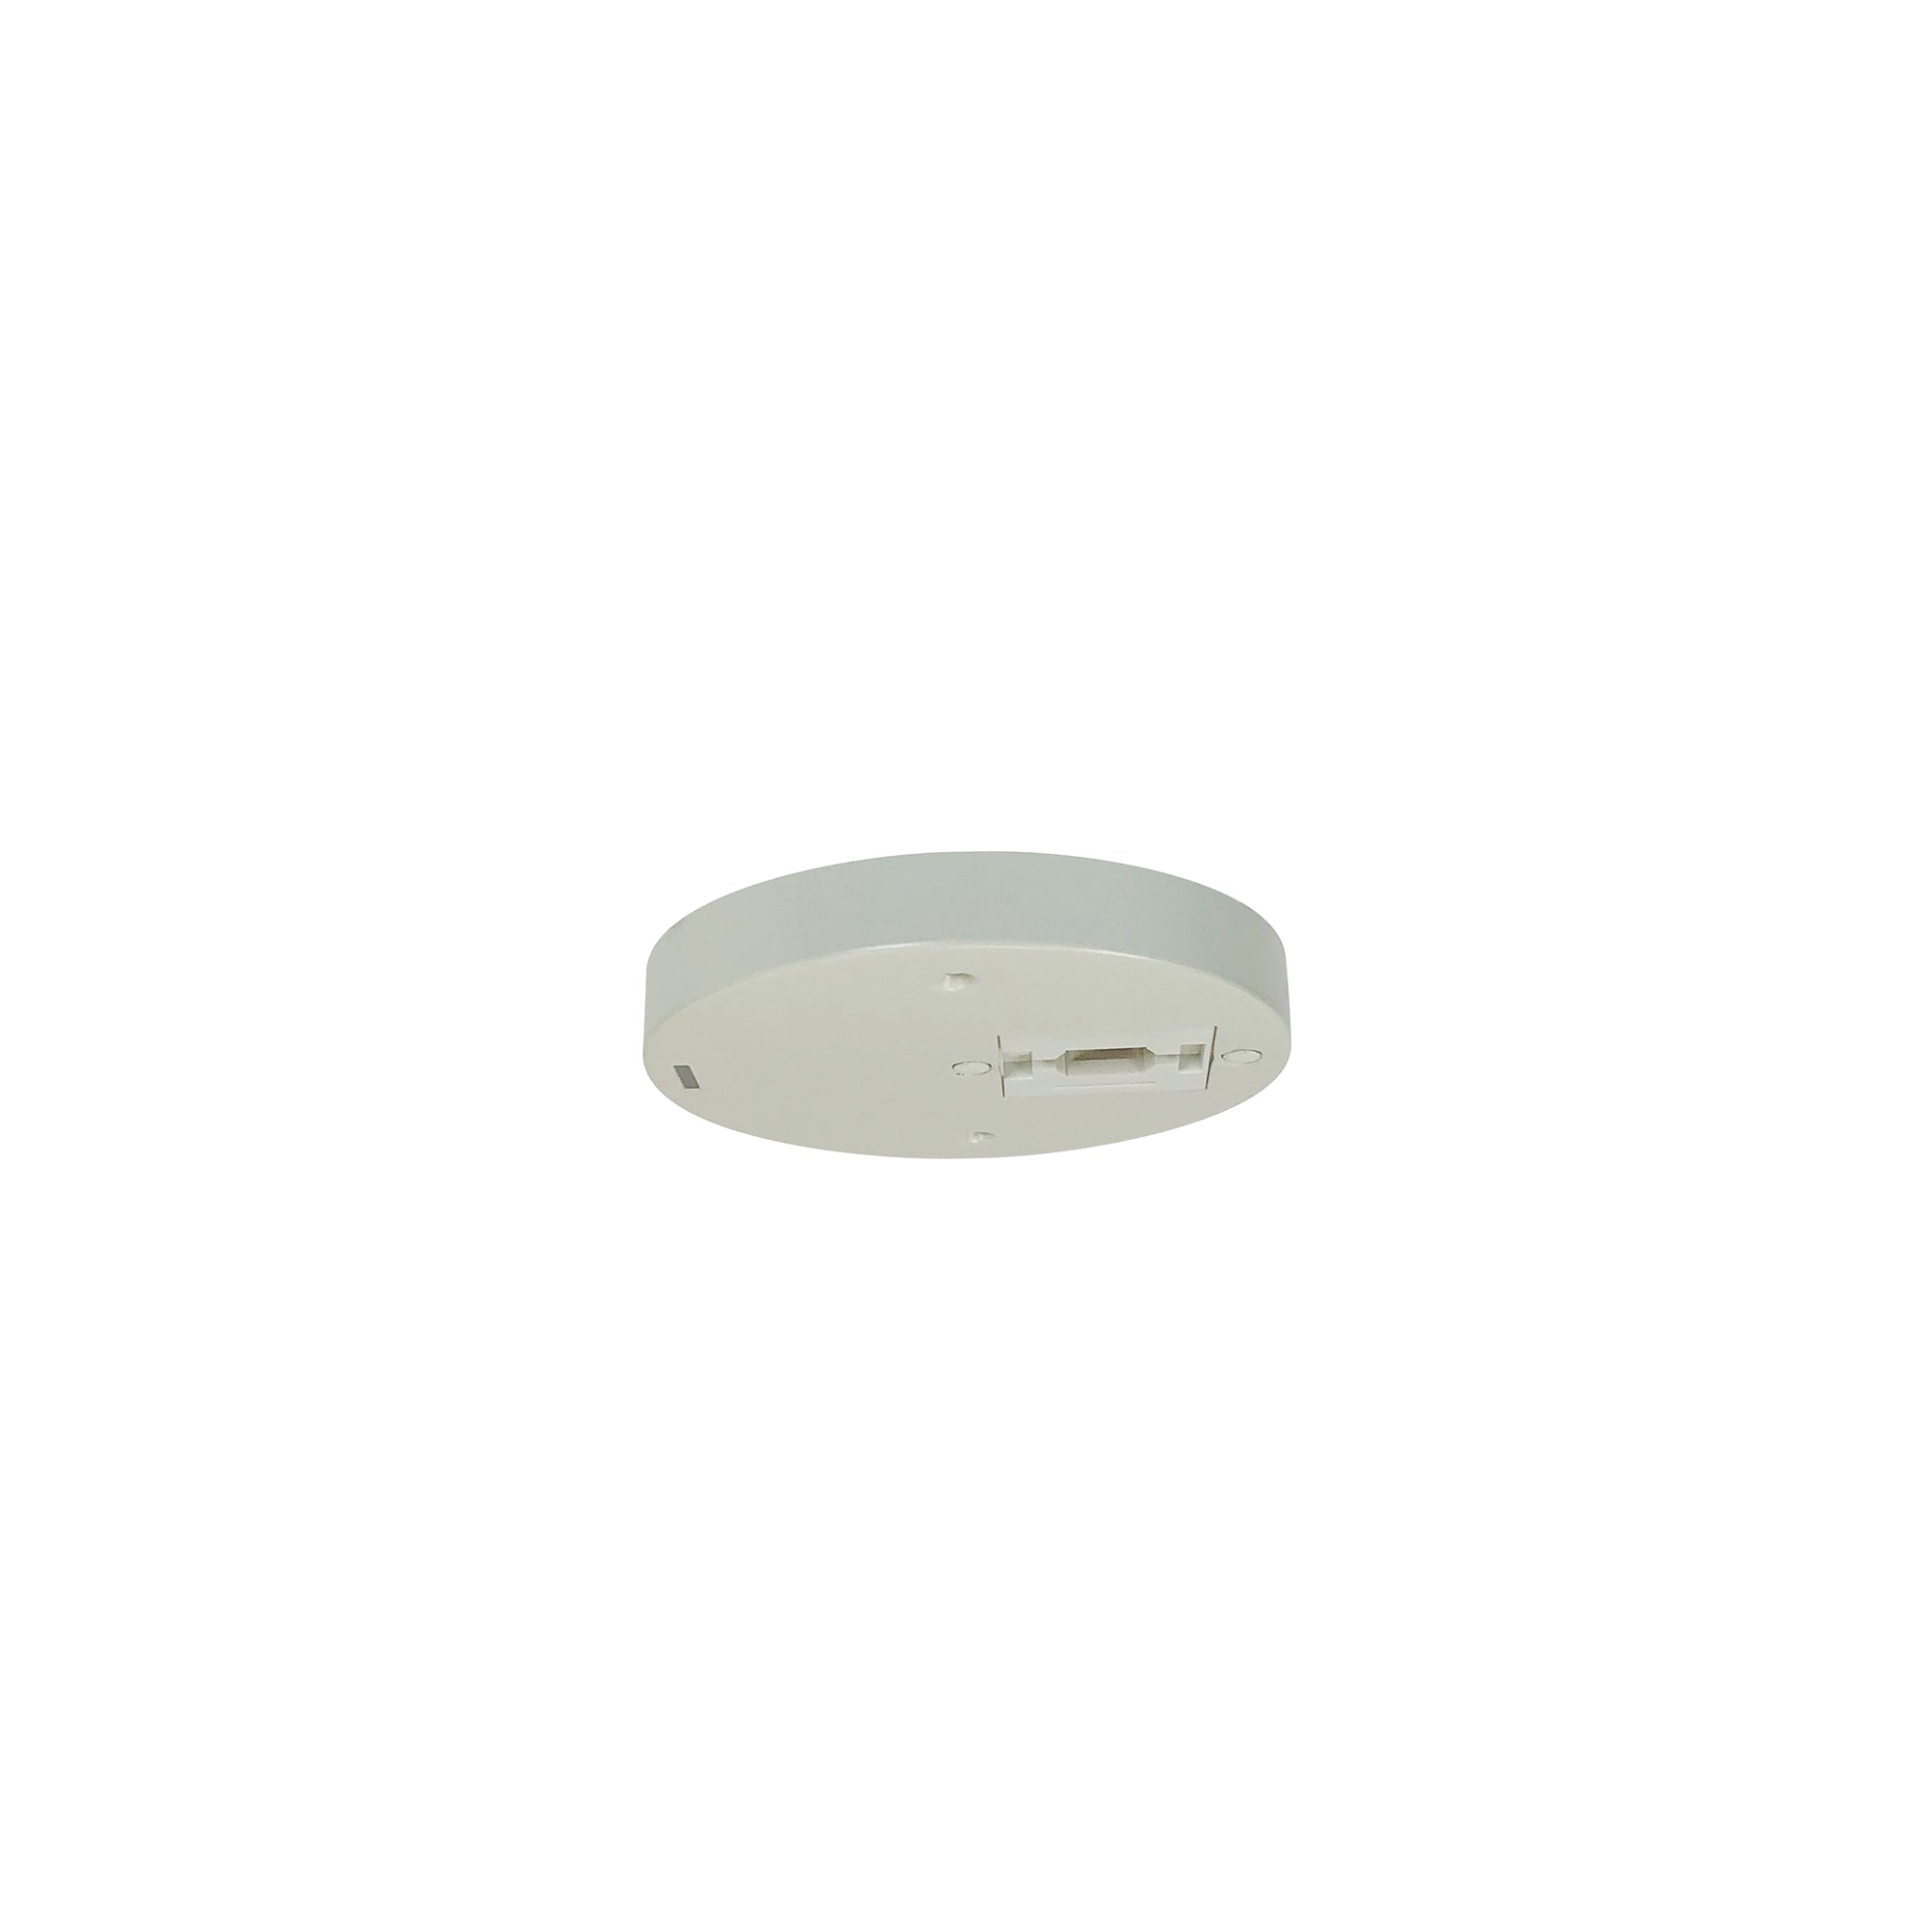 Nora Lighting NT-379W - Track - Round Monopoint Canopy for Aiden Track Head (NTE-850), White